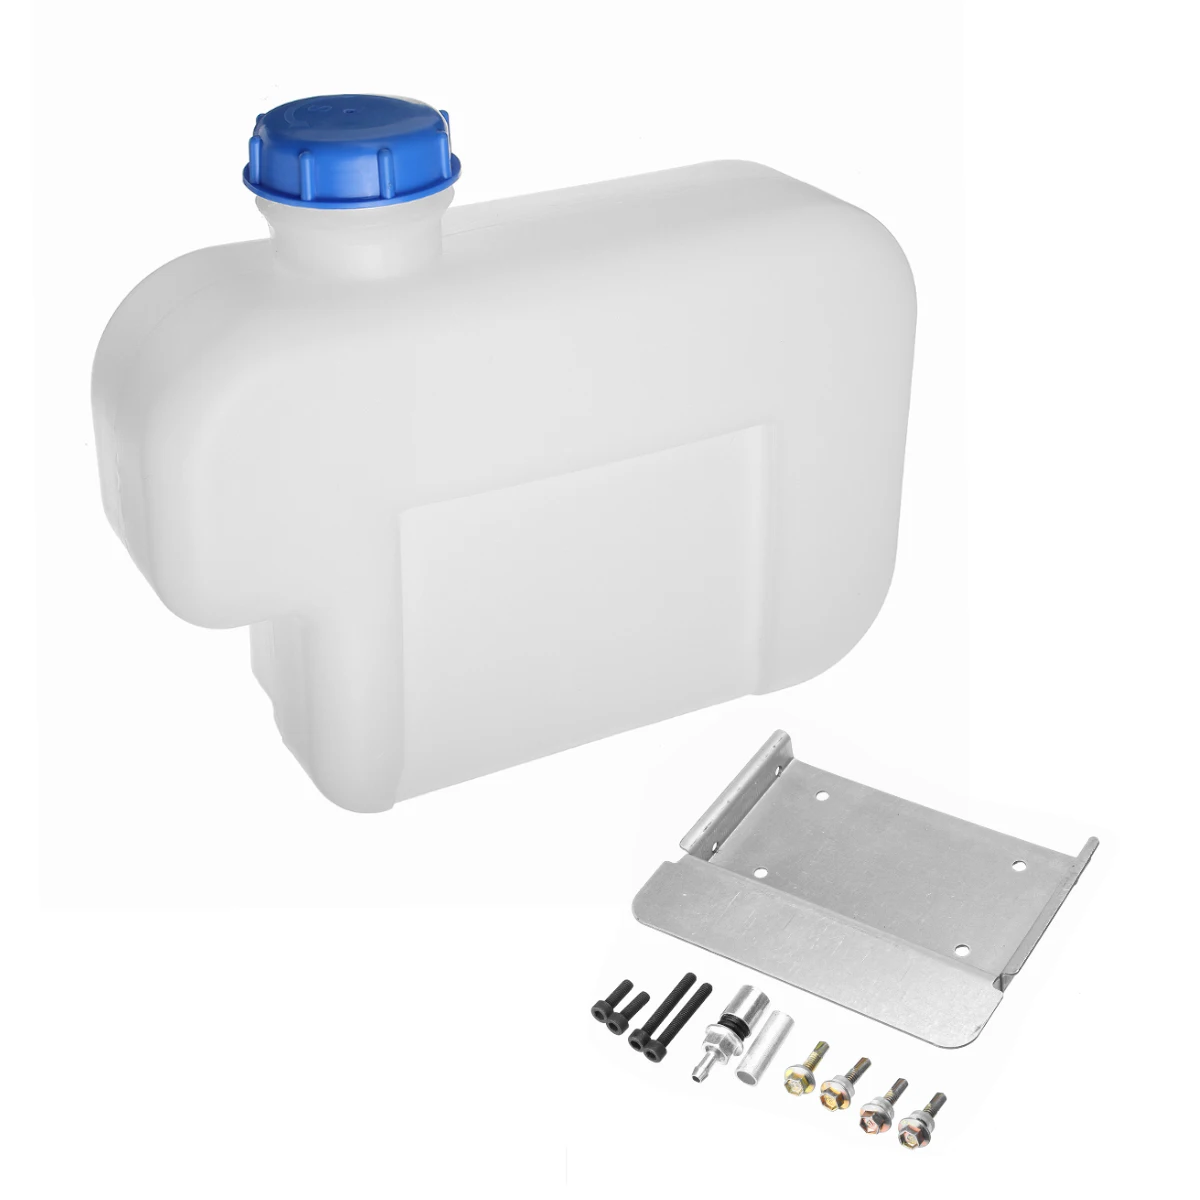 Color : White Fuel tank Plastic Fuel Oil Gasoline Water Tank For Cars Truck Air Diesel Parking Heater Bracket For storing oil 